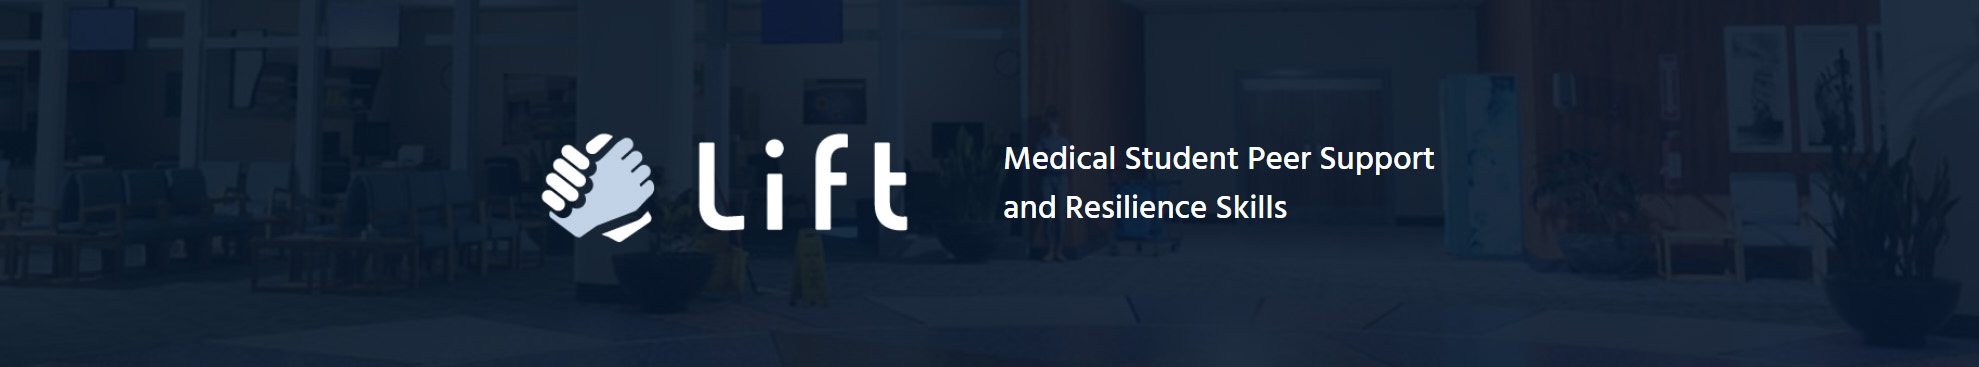 Lift: Medical Student Peer Support and Resilience Skills